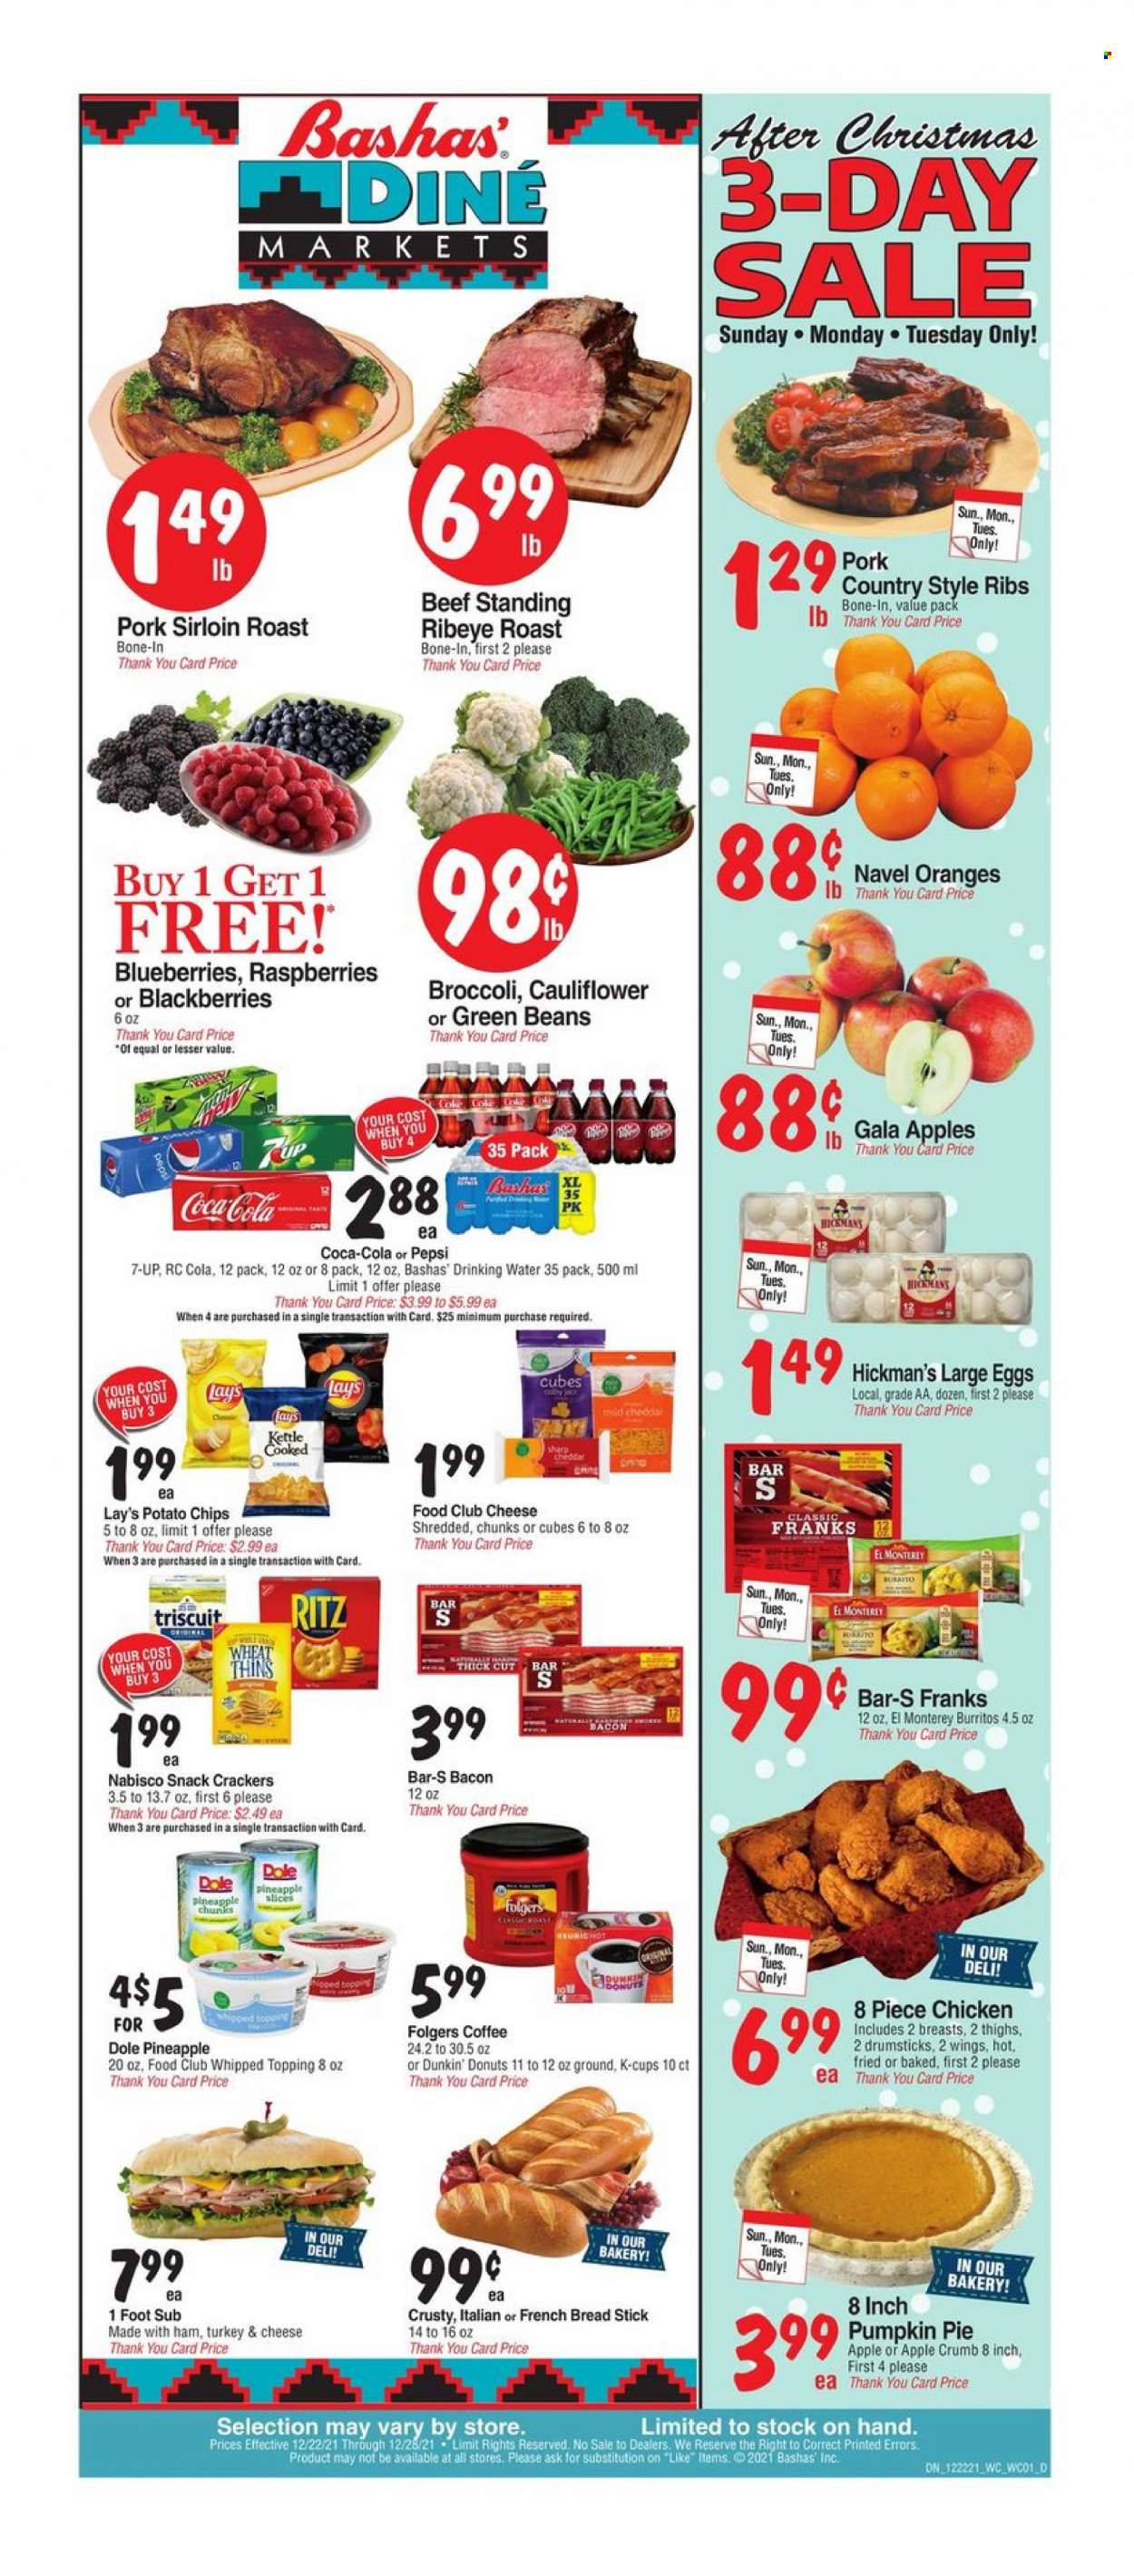 thumbnail - Bashas' Diné Markets Flyer - 12/22/2021 - 12/28/2021 - Sales products - bread, pie, french bread, donut, Dunkin' Donuts, broccoli, green beans, pumpkin, Dole, blackberries, blueberries, Gala, pineapple, oranges, burrito, bacon, ham, mild cheddar, large eggs, snack, crackers, RITZ, potato chips, chips, Lay’s, Thins, topping, Coca-Cola, Pepsi, 7UP, coffee, Folgers, coffee capsules, K-Cups, pork loin, pork ribs, country style ribs, navel oranges. Page 1.